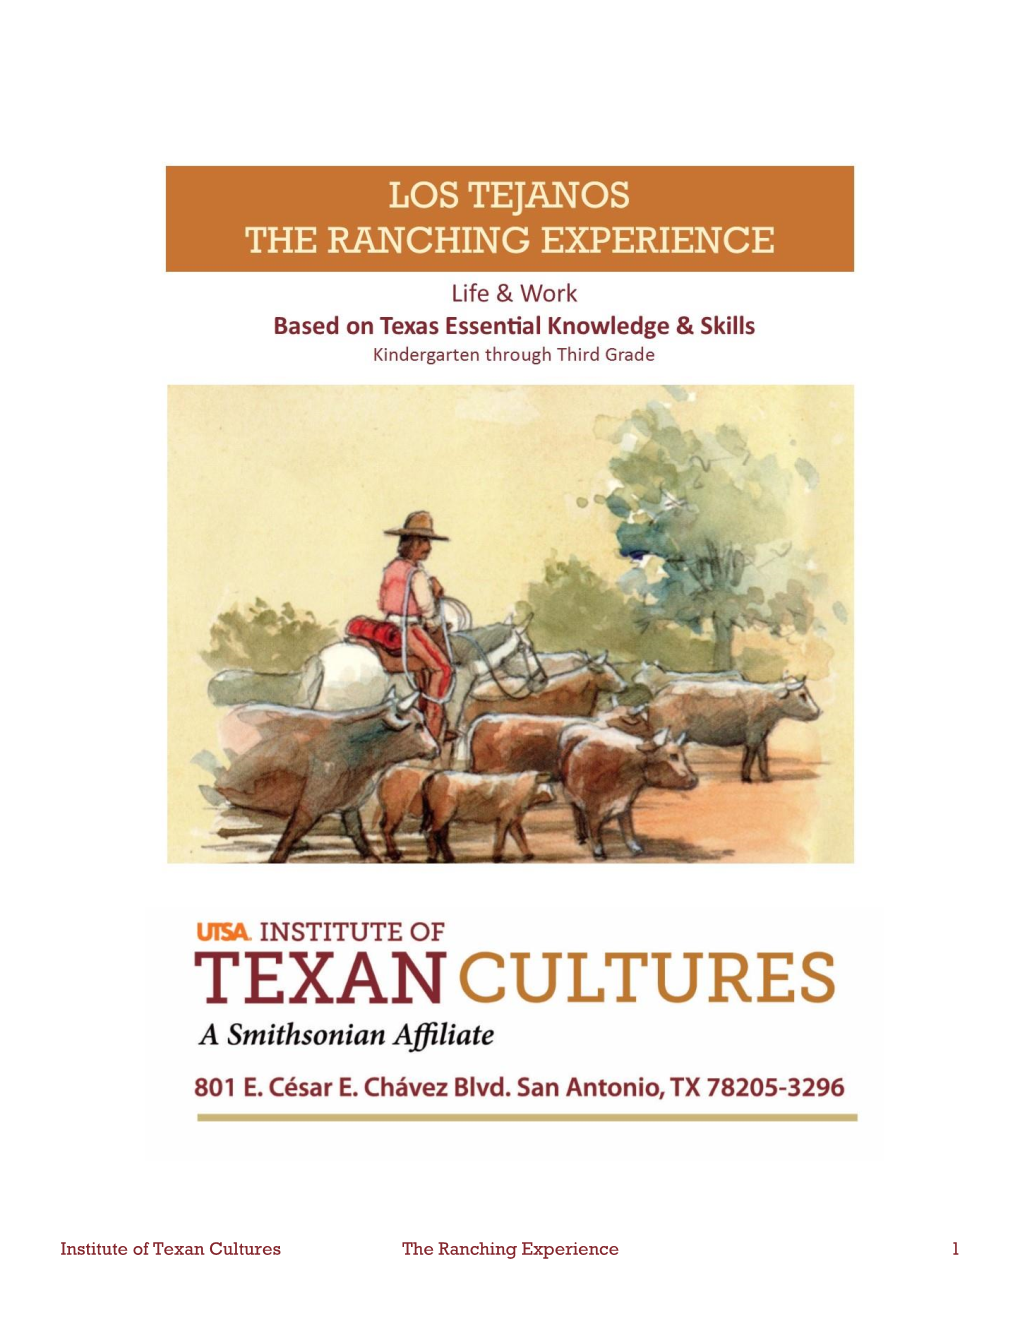 Institute of Texan Cultures the Ranching Experience 1 Introduction